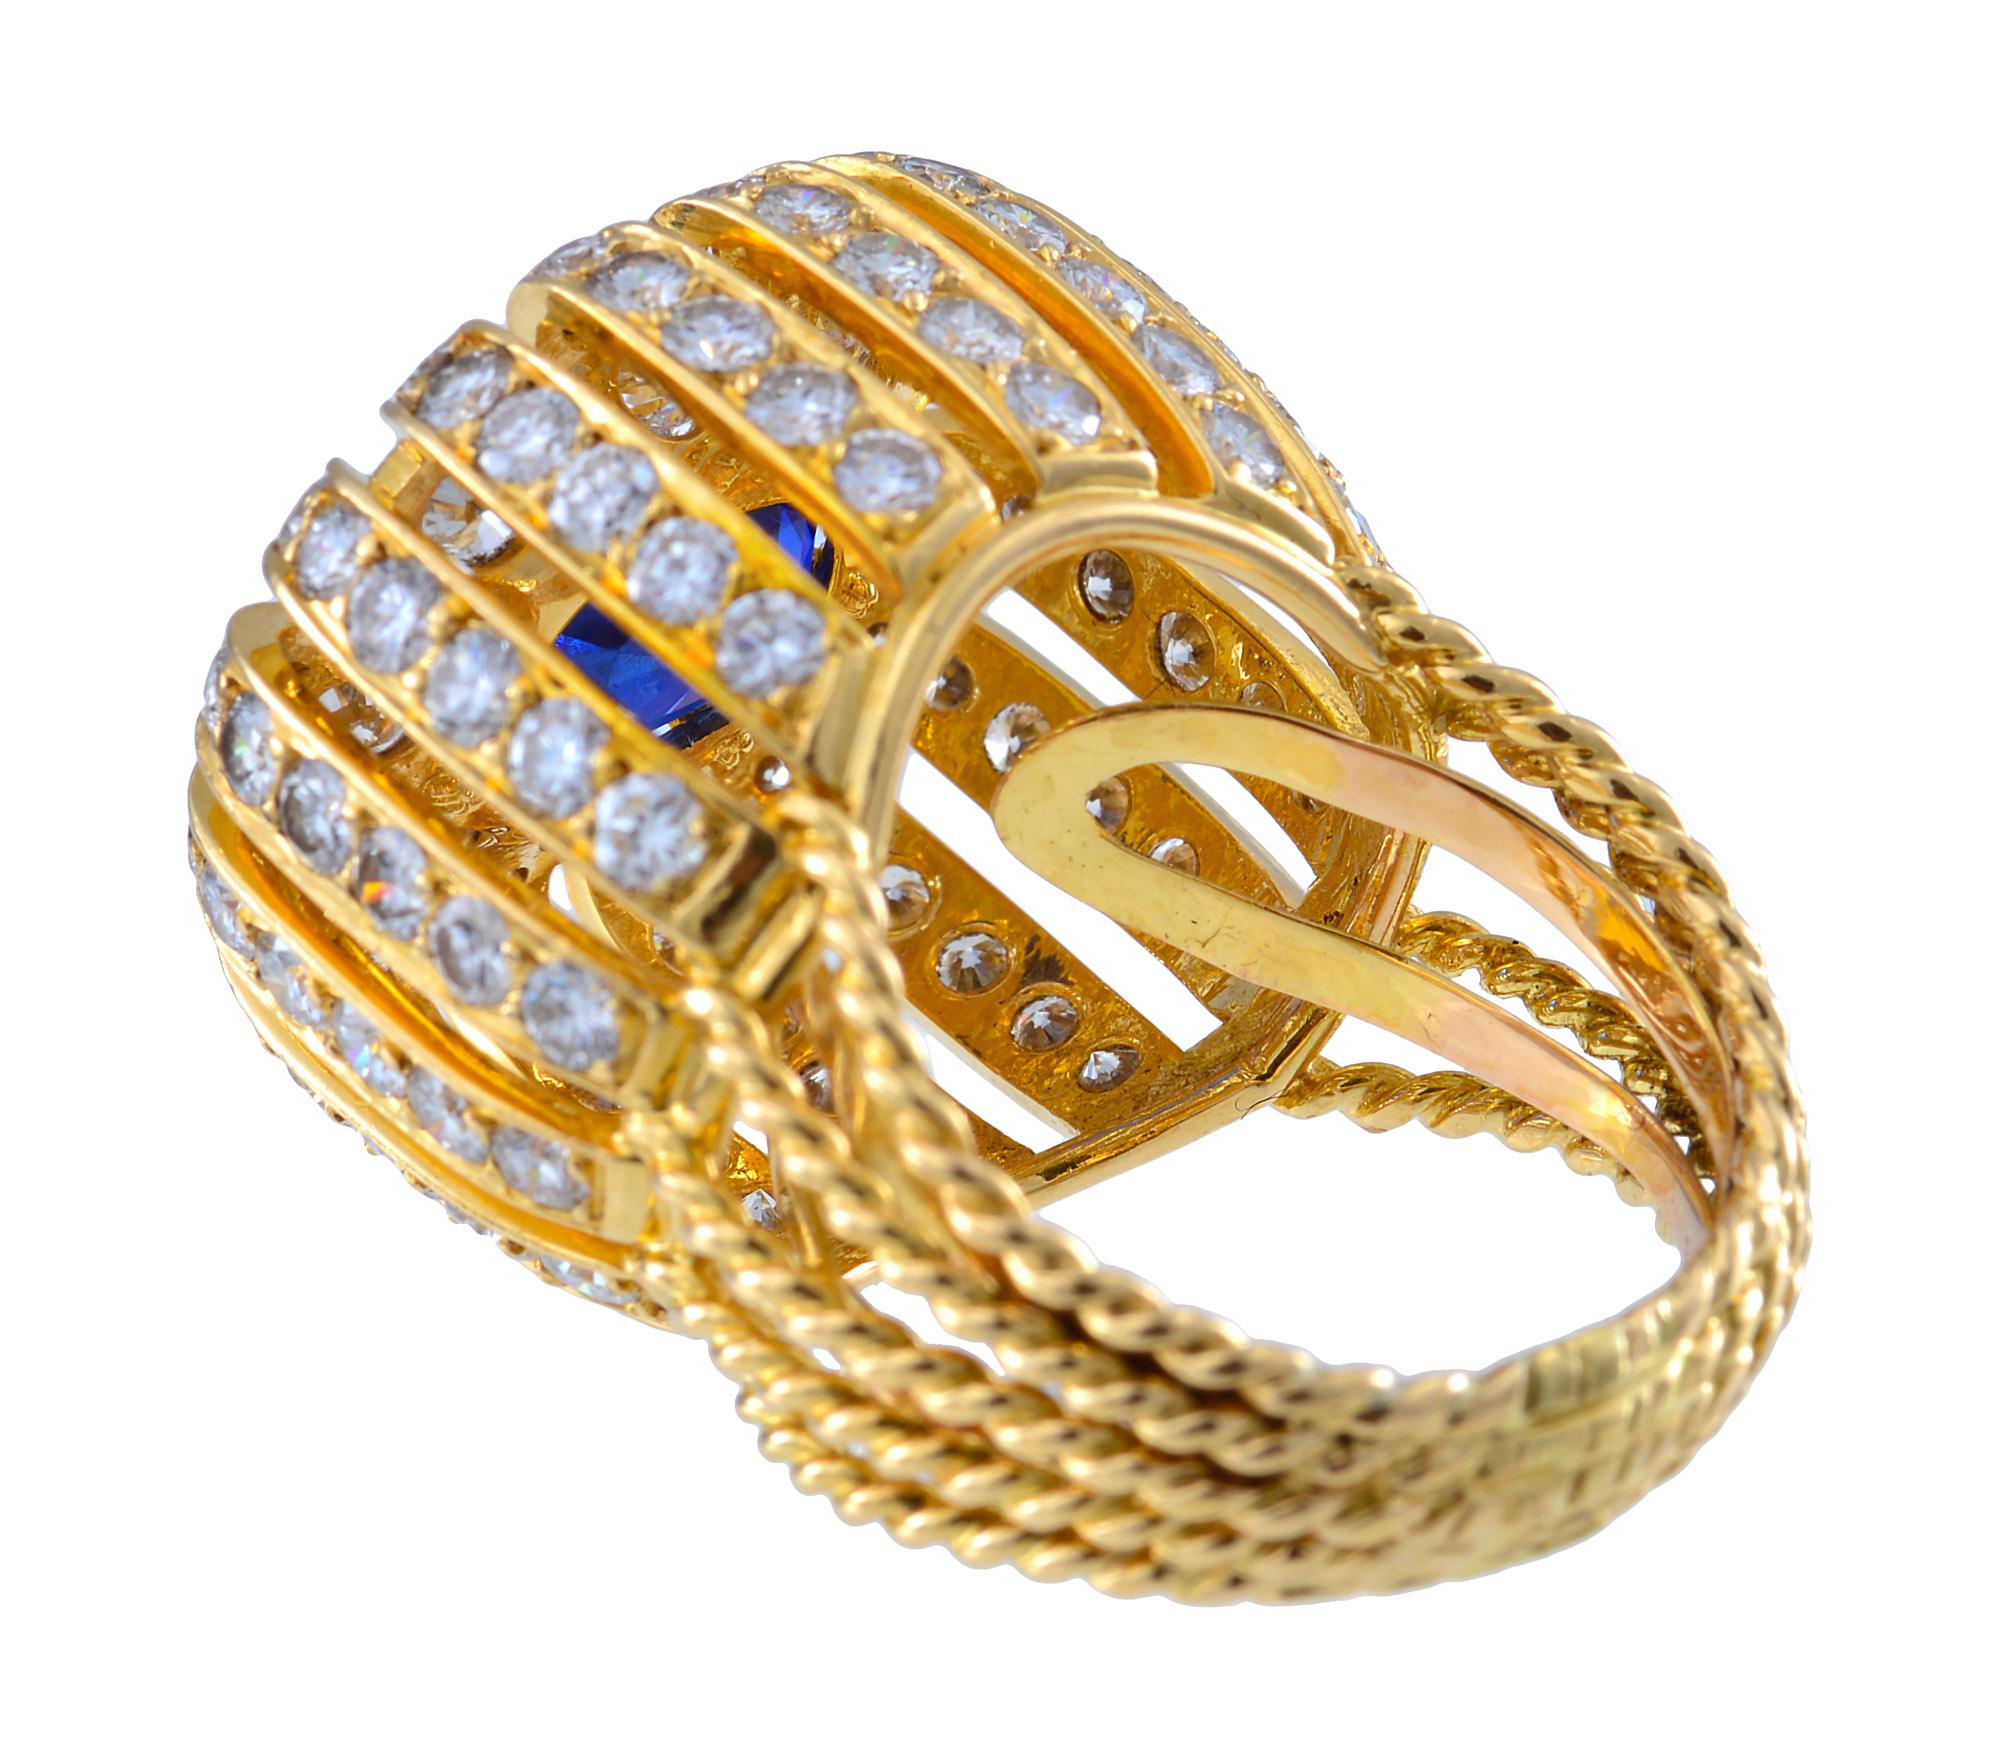 Women's Early 1950s Yellow Gold, Diamond and Sapphire Ring For Sale